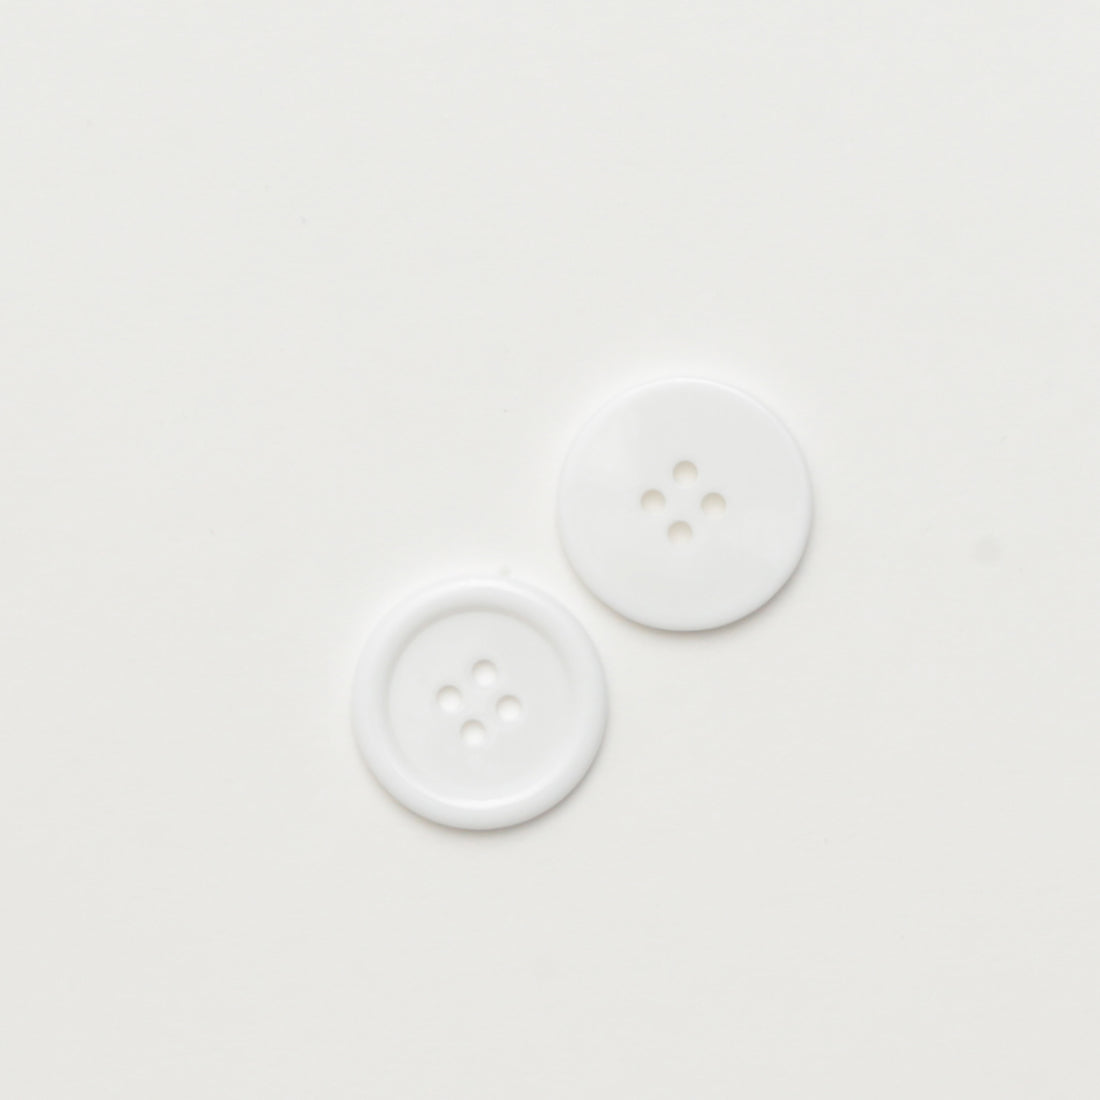 Resin 4 Hole Button - 25mm - Assorted